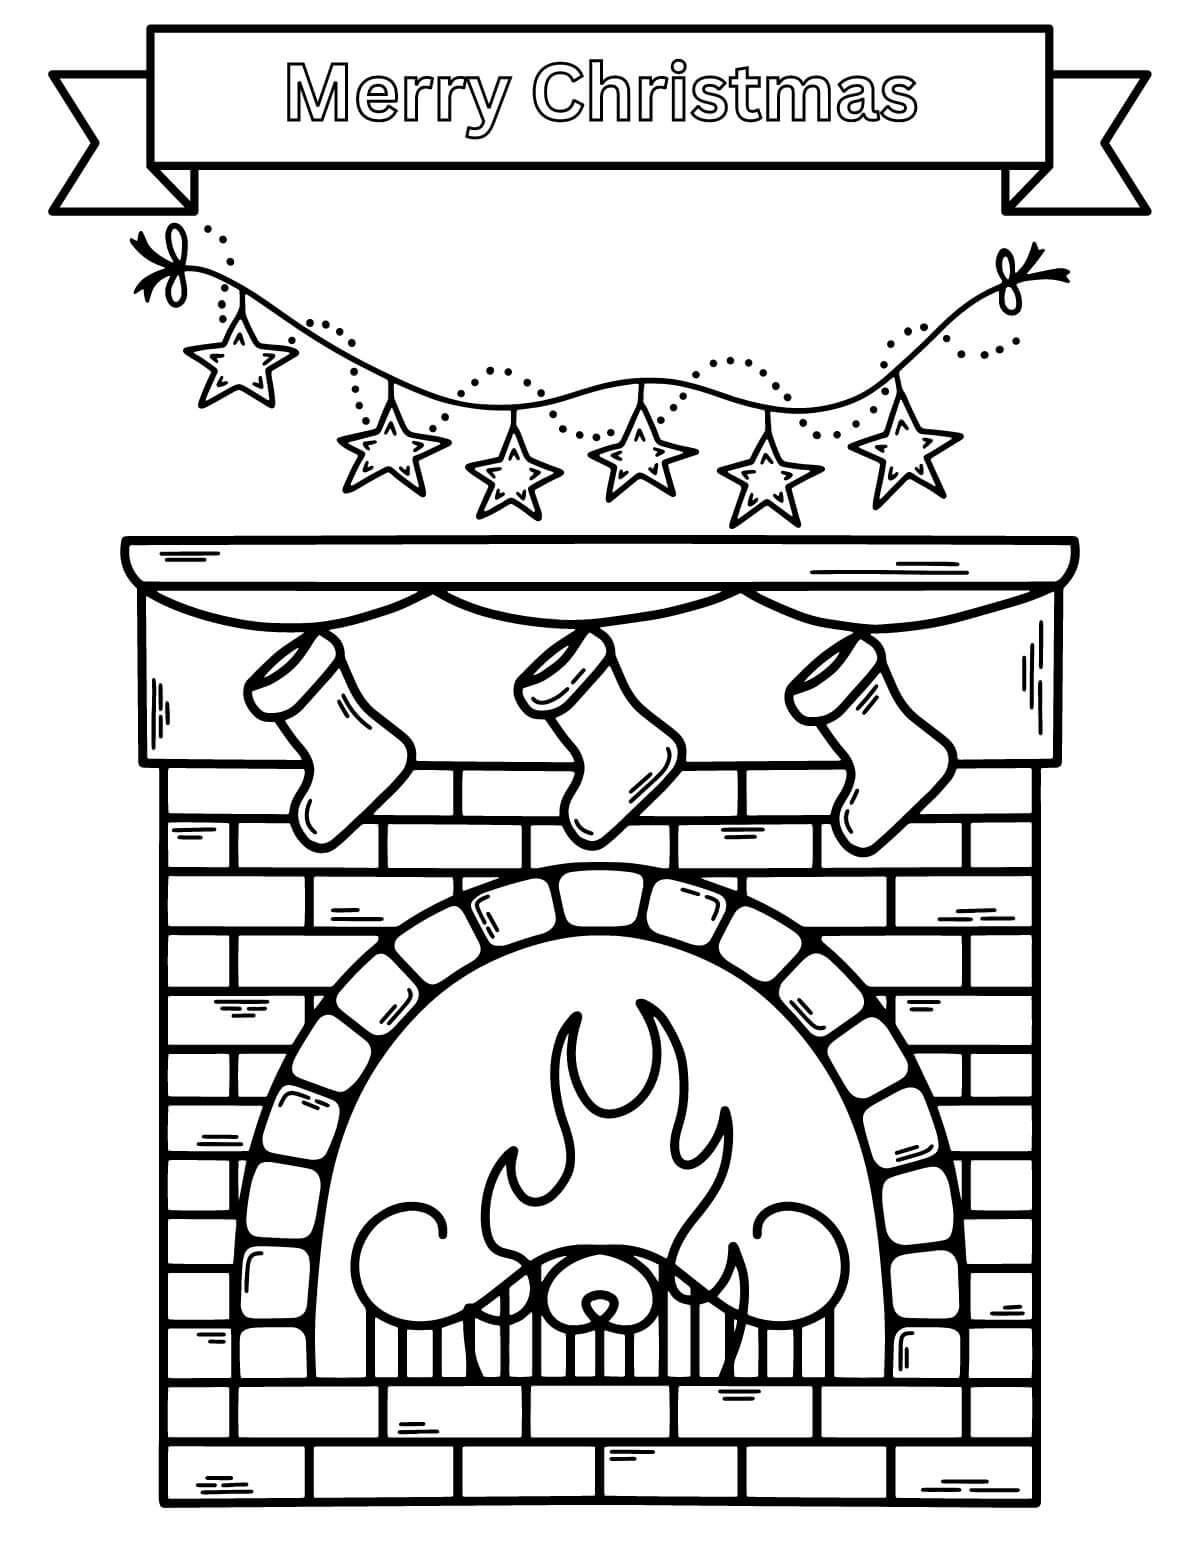 Fireplace with Stockings coloring page